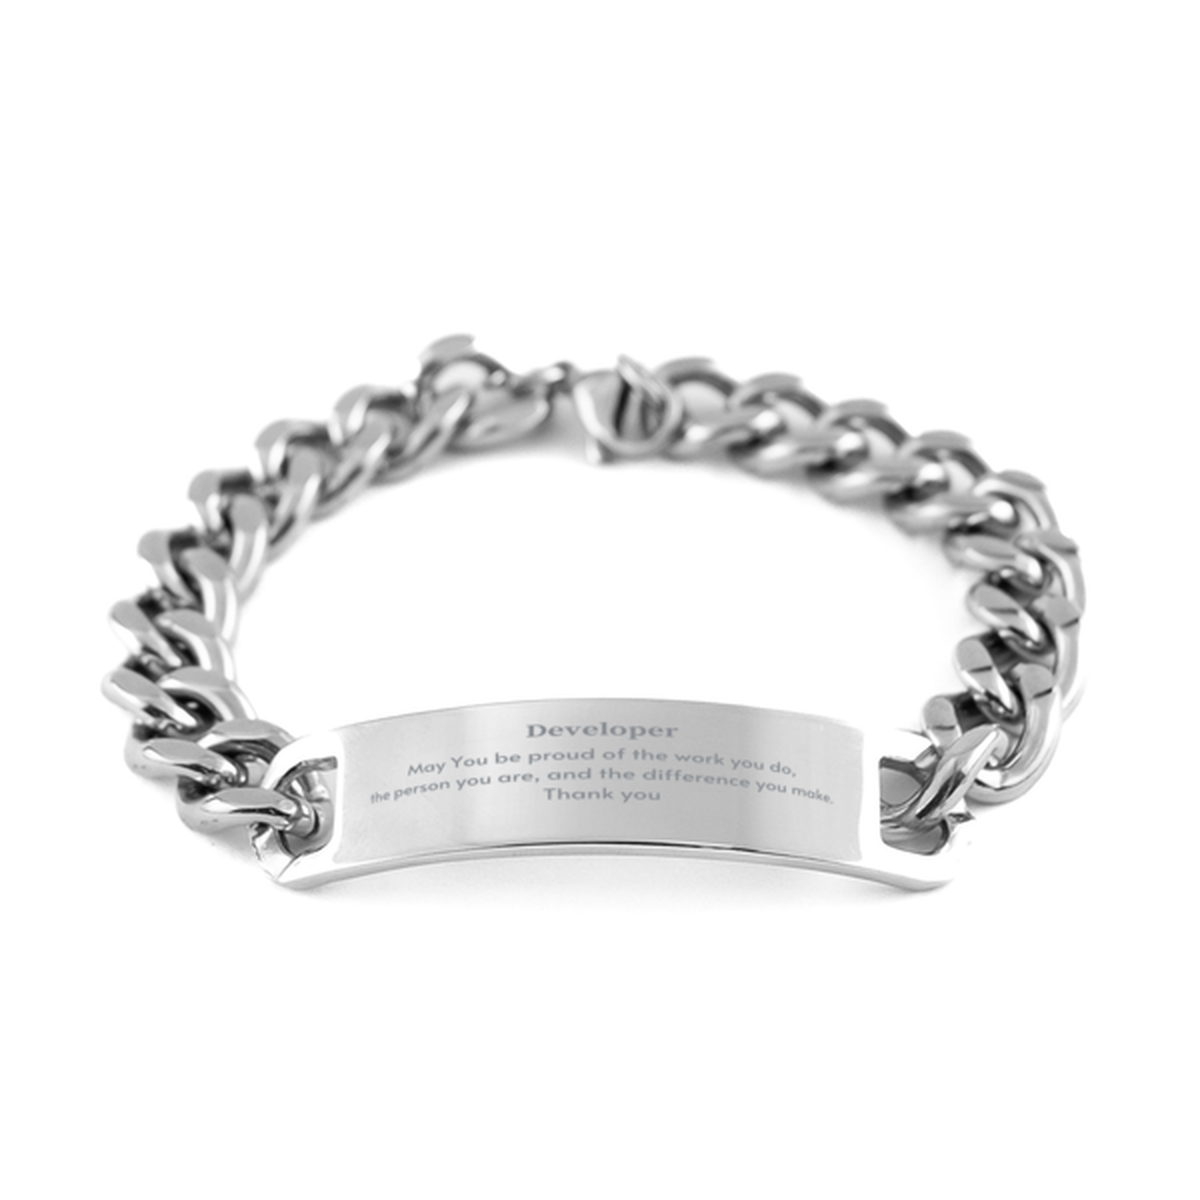 Heartwarming Cuban Chain Stainless Steel Bracelet Retirement Coworkers Gifts for Developer, Developer May You be proud of the work you do, the person you are Gifts for Boss Men Women Friends